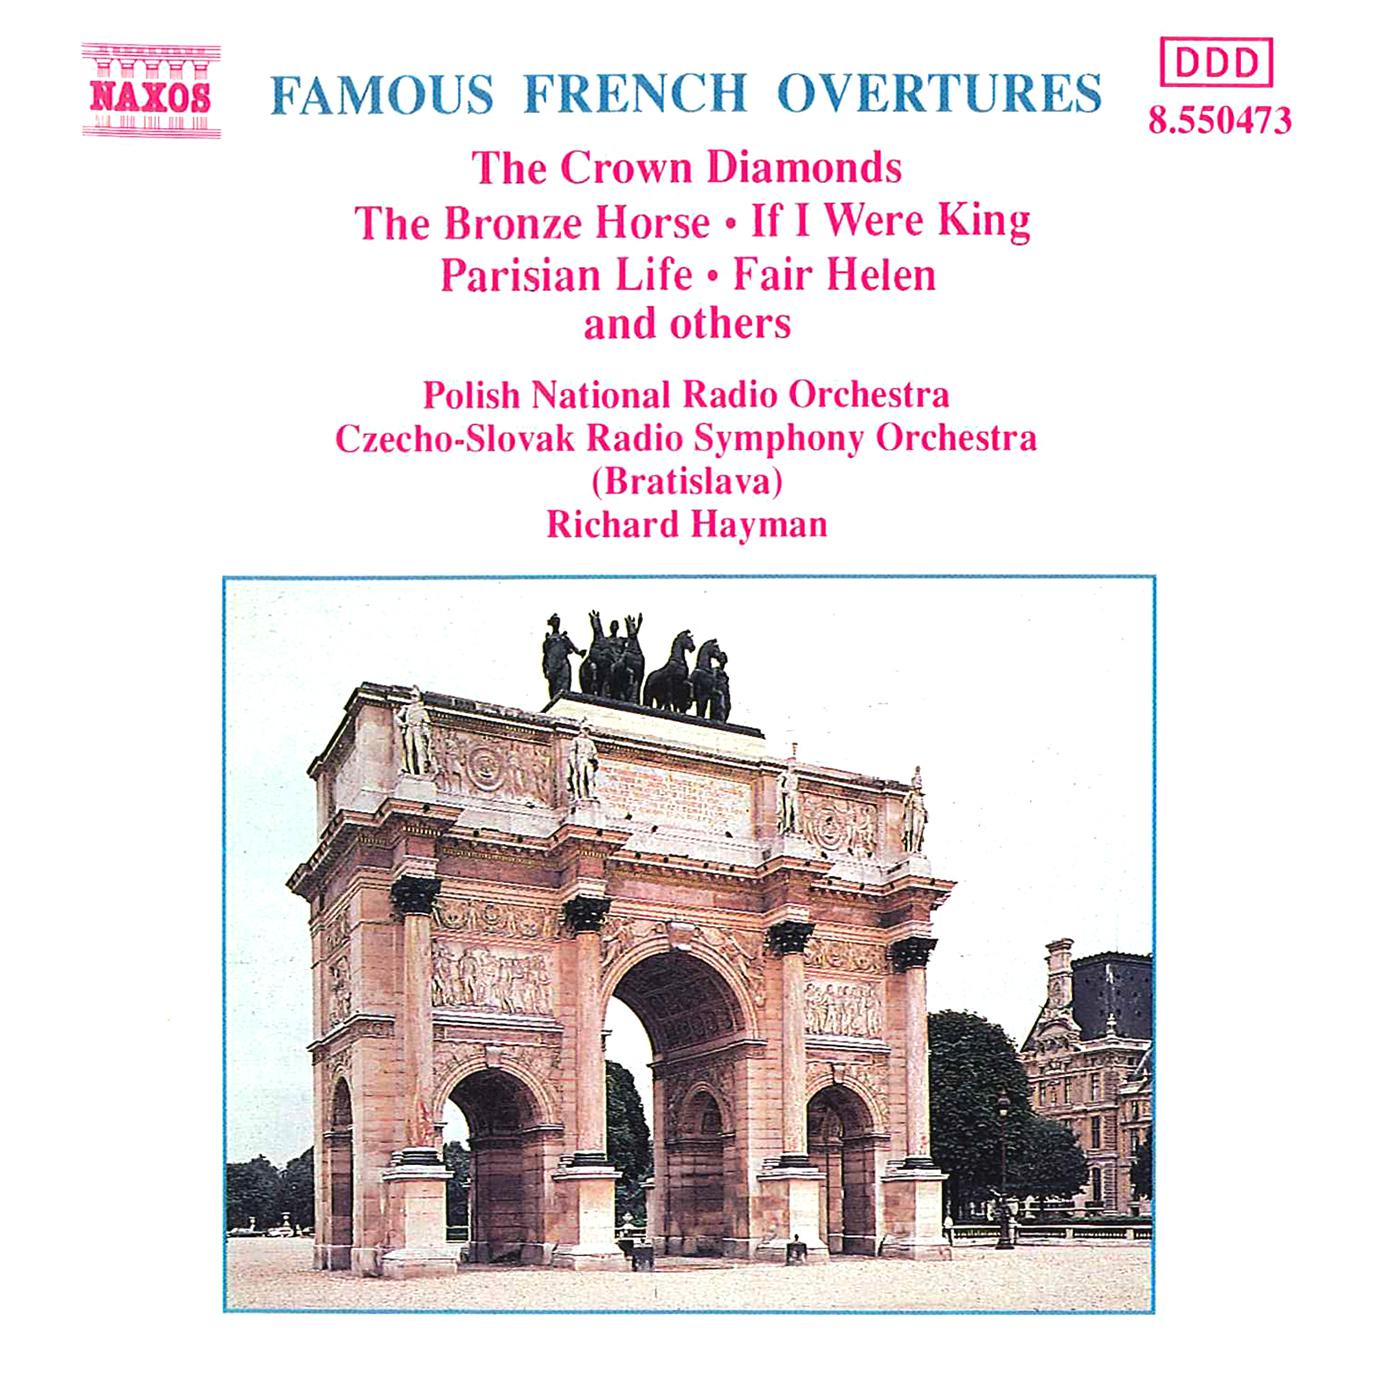 FAMOUS FRENCH OVERTURES